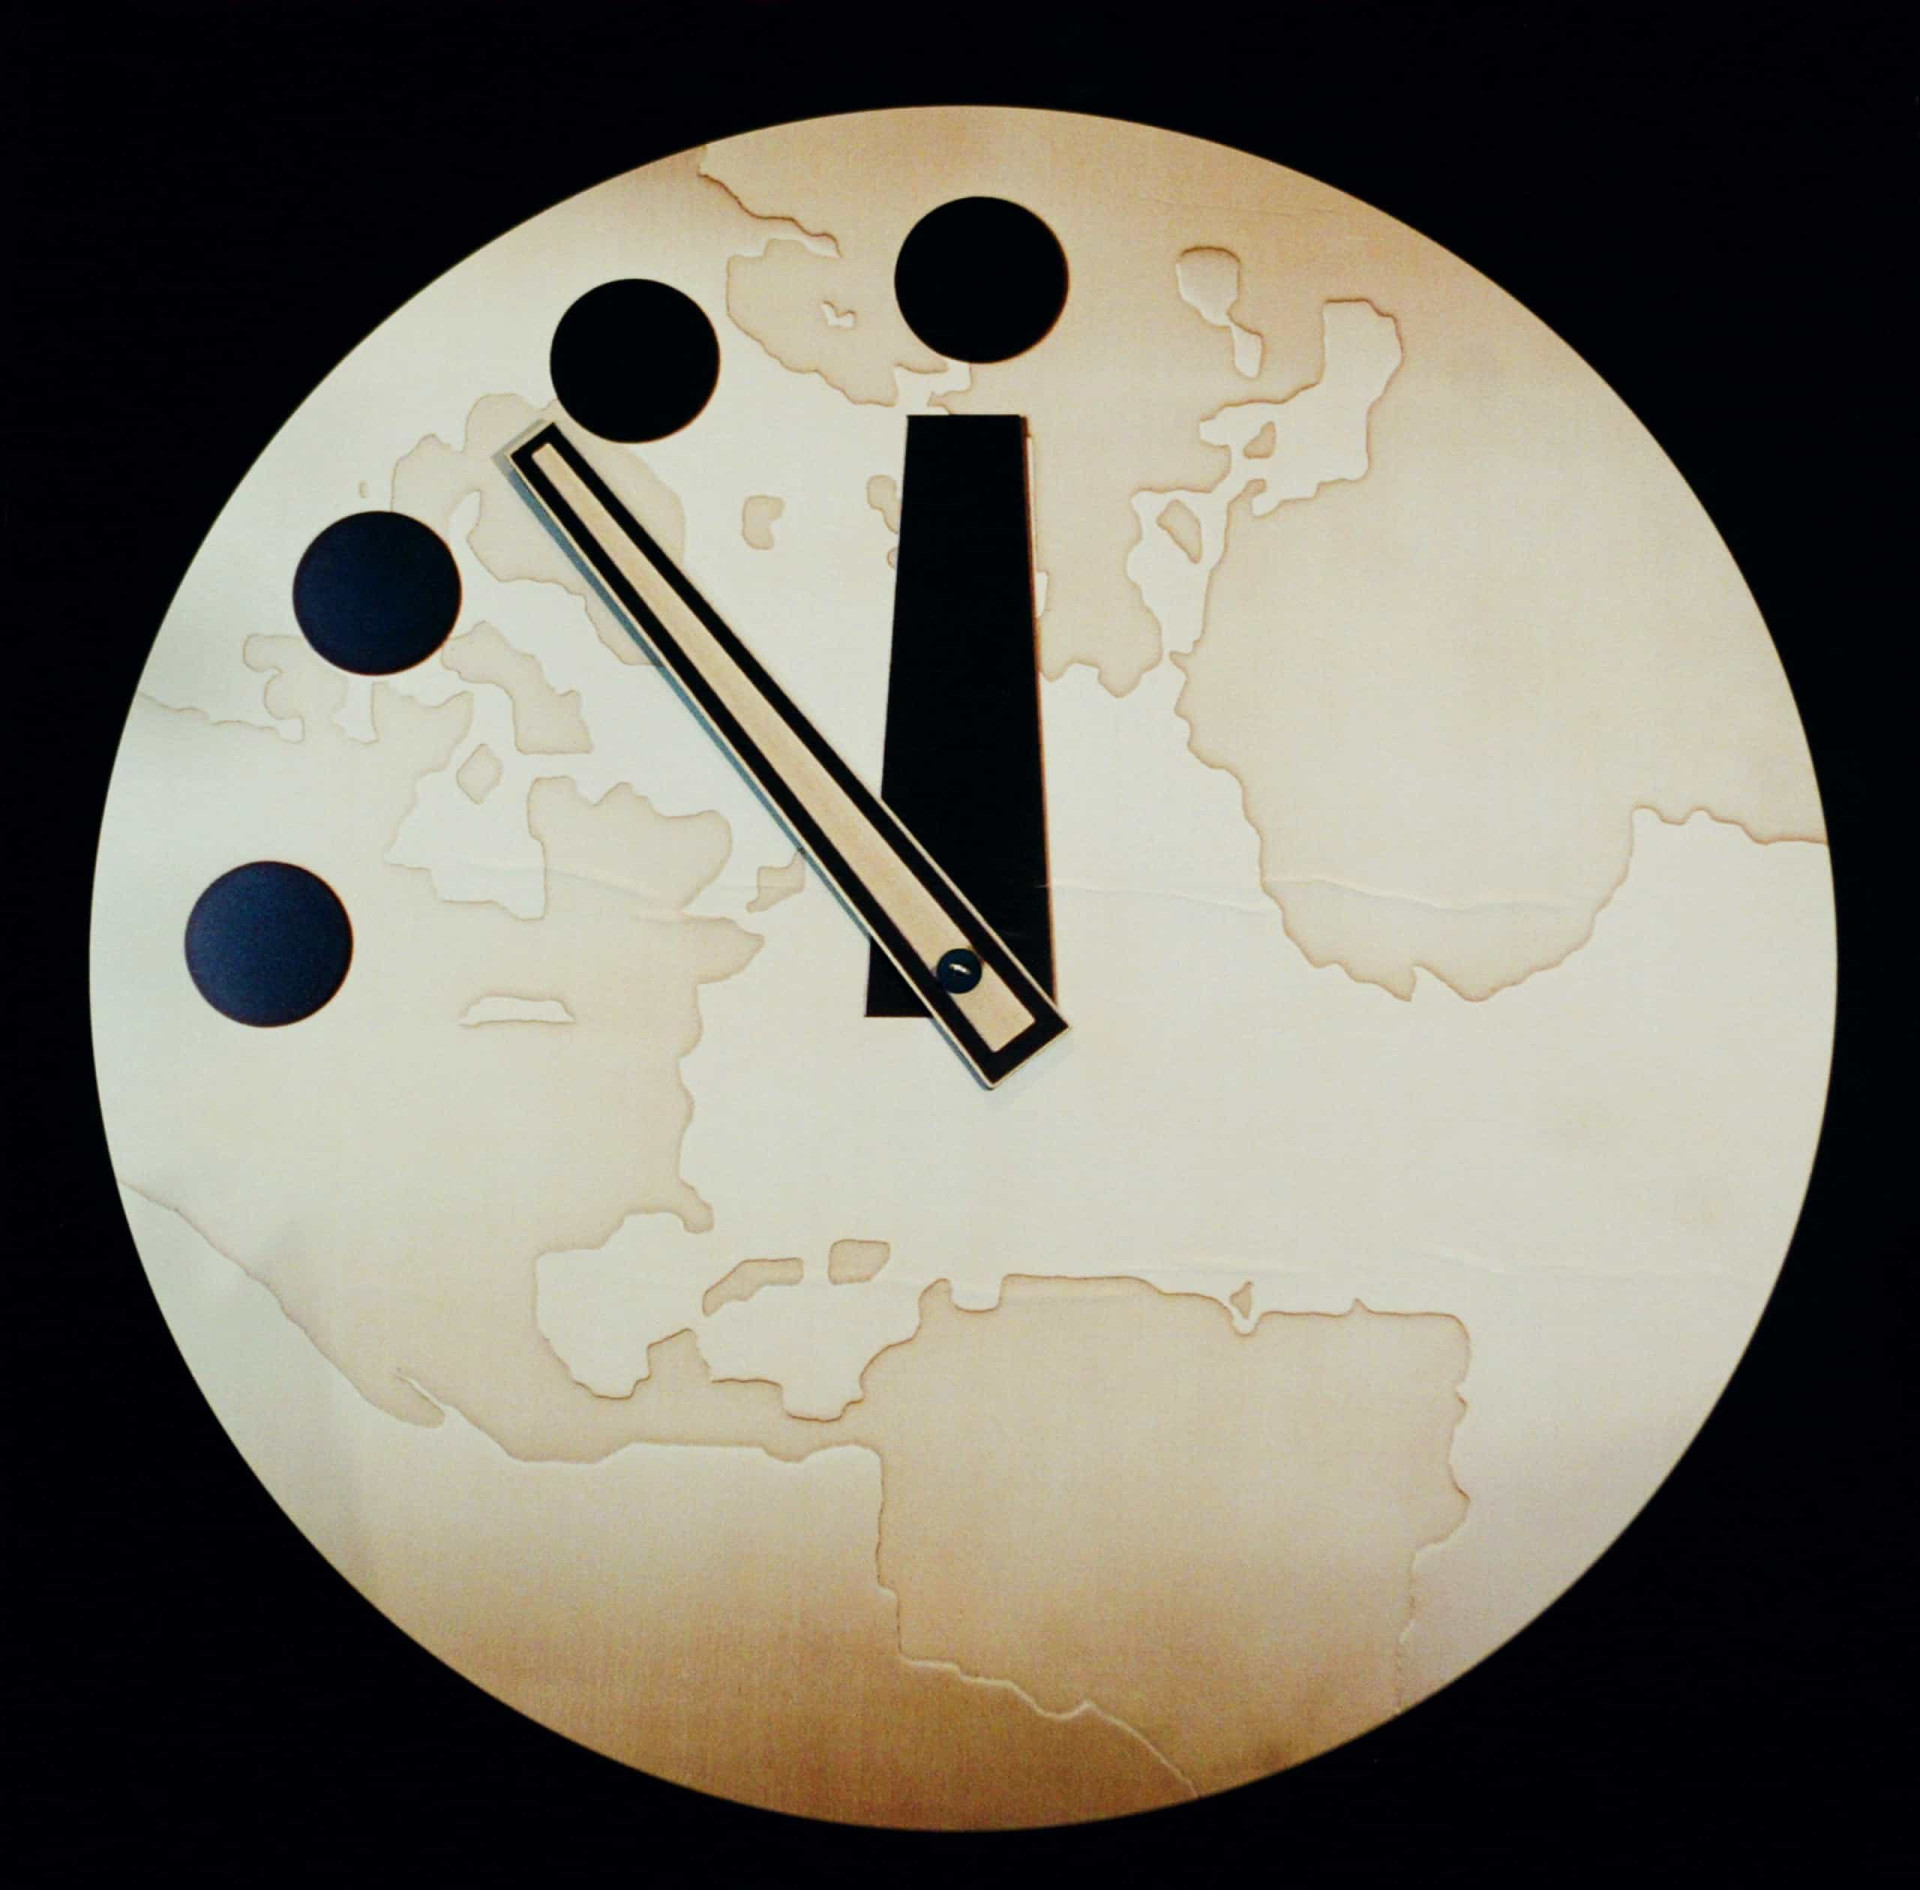 <p>The Doomsday Clock is a symbol that represents the likelihood of a man-made global catastrophe.</p><p><a href="https://www.msn.com/en-ca/community/channel/vid-7xx8mnucu55yw63we9va2gwr7uihbxwc68fxqp25x6tg4ftibpra?cvid=94631541bc0f4f89bfd59158d696ad7e">Follow us and access great exclusive content every day</a></p>